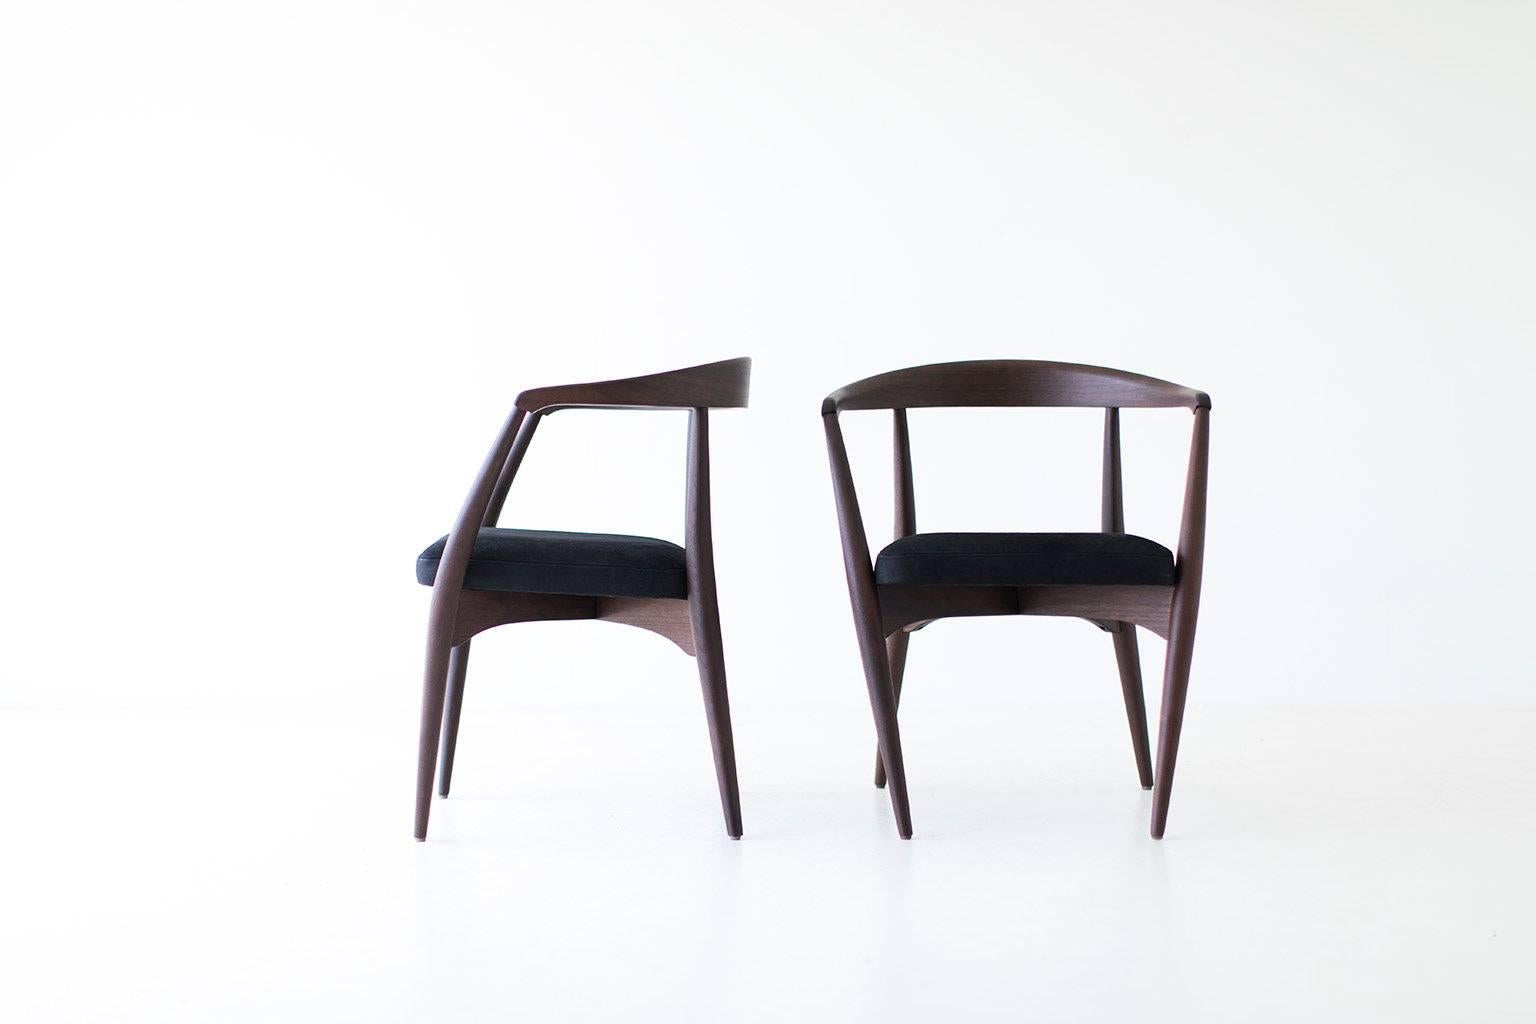 American Lawrence Peabody Dining Chairs for Craft Associates